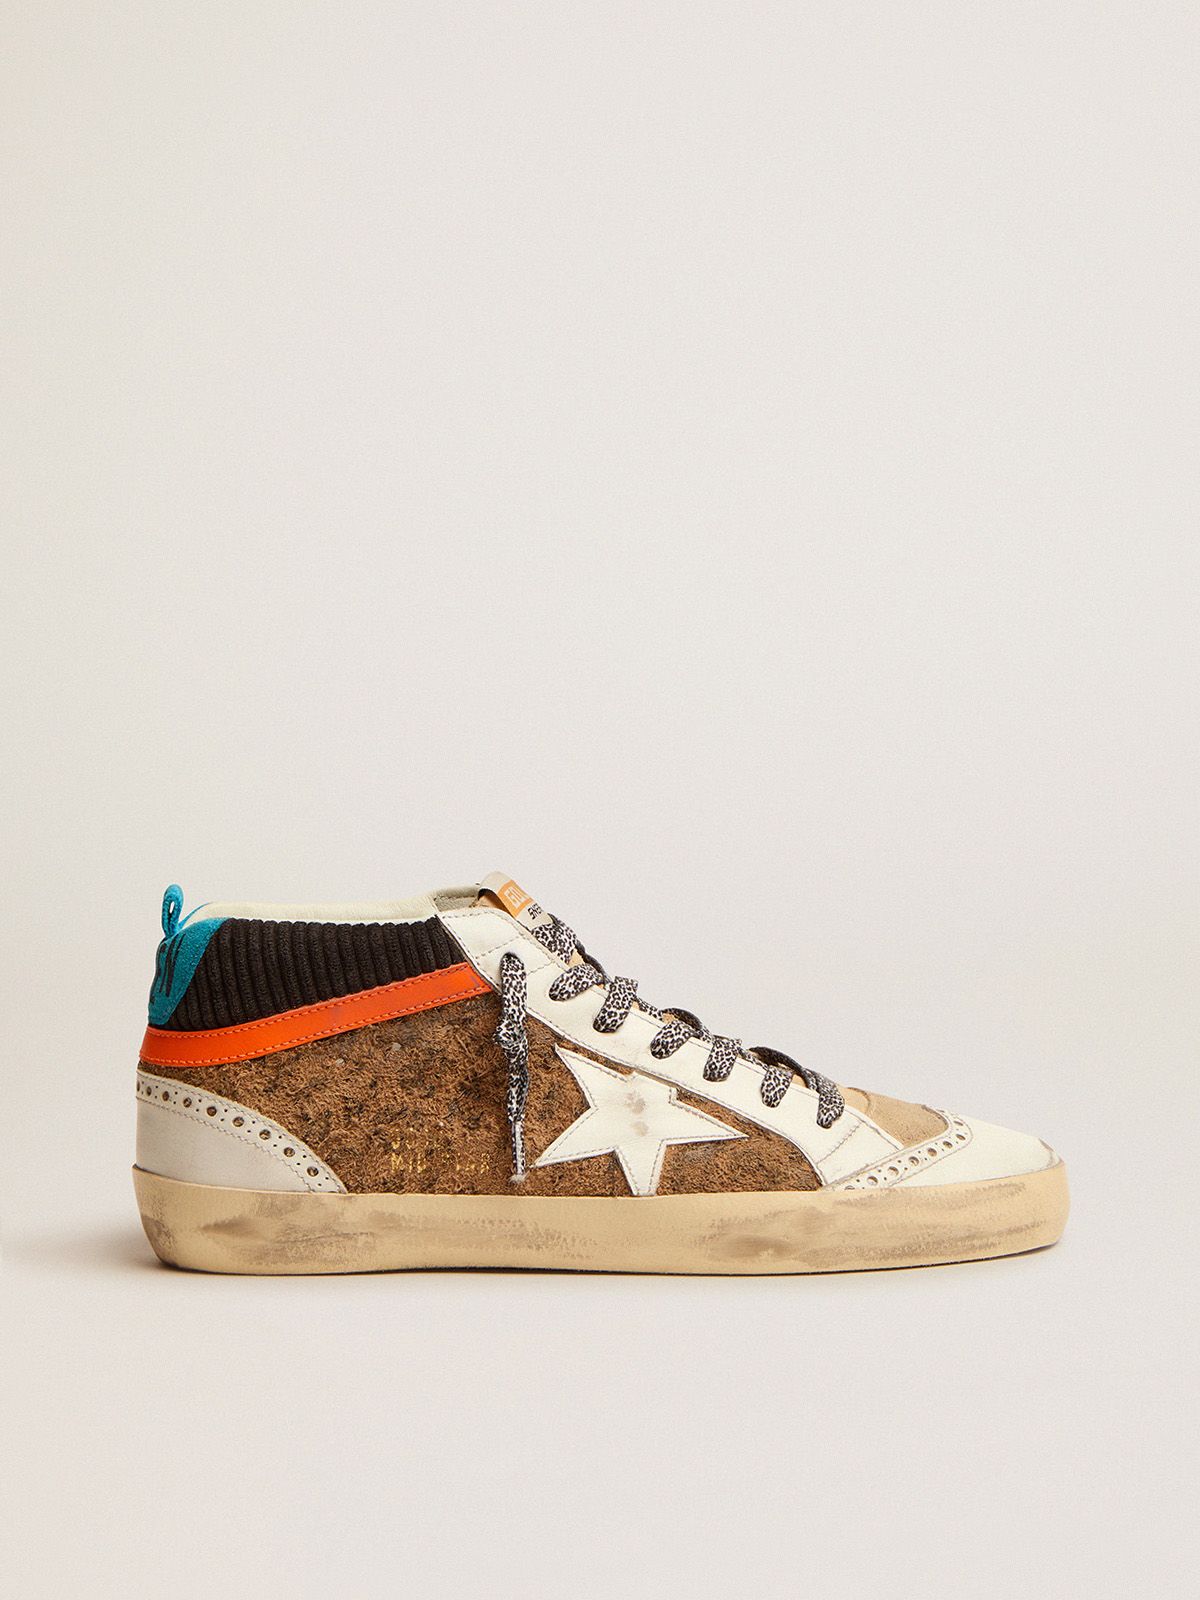 Mid Star LTD sneakers with leopard-print and corduroy-print suede upper